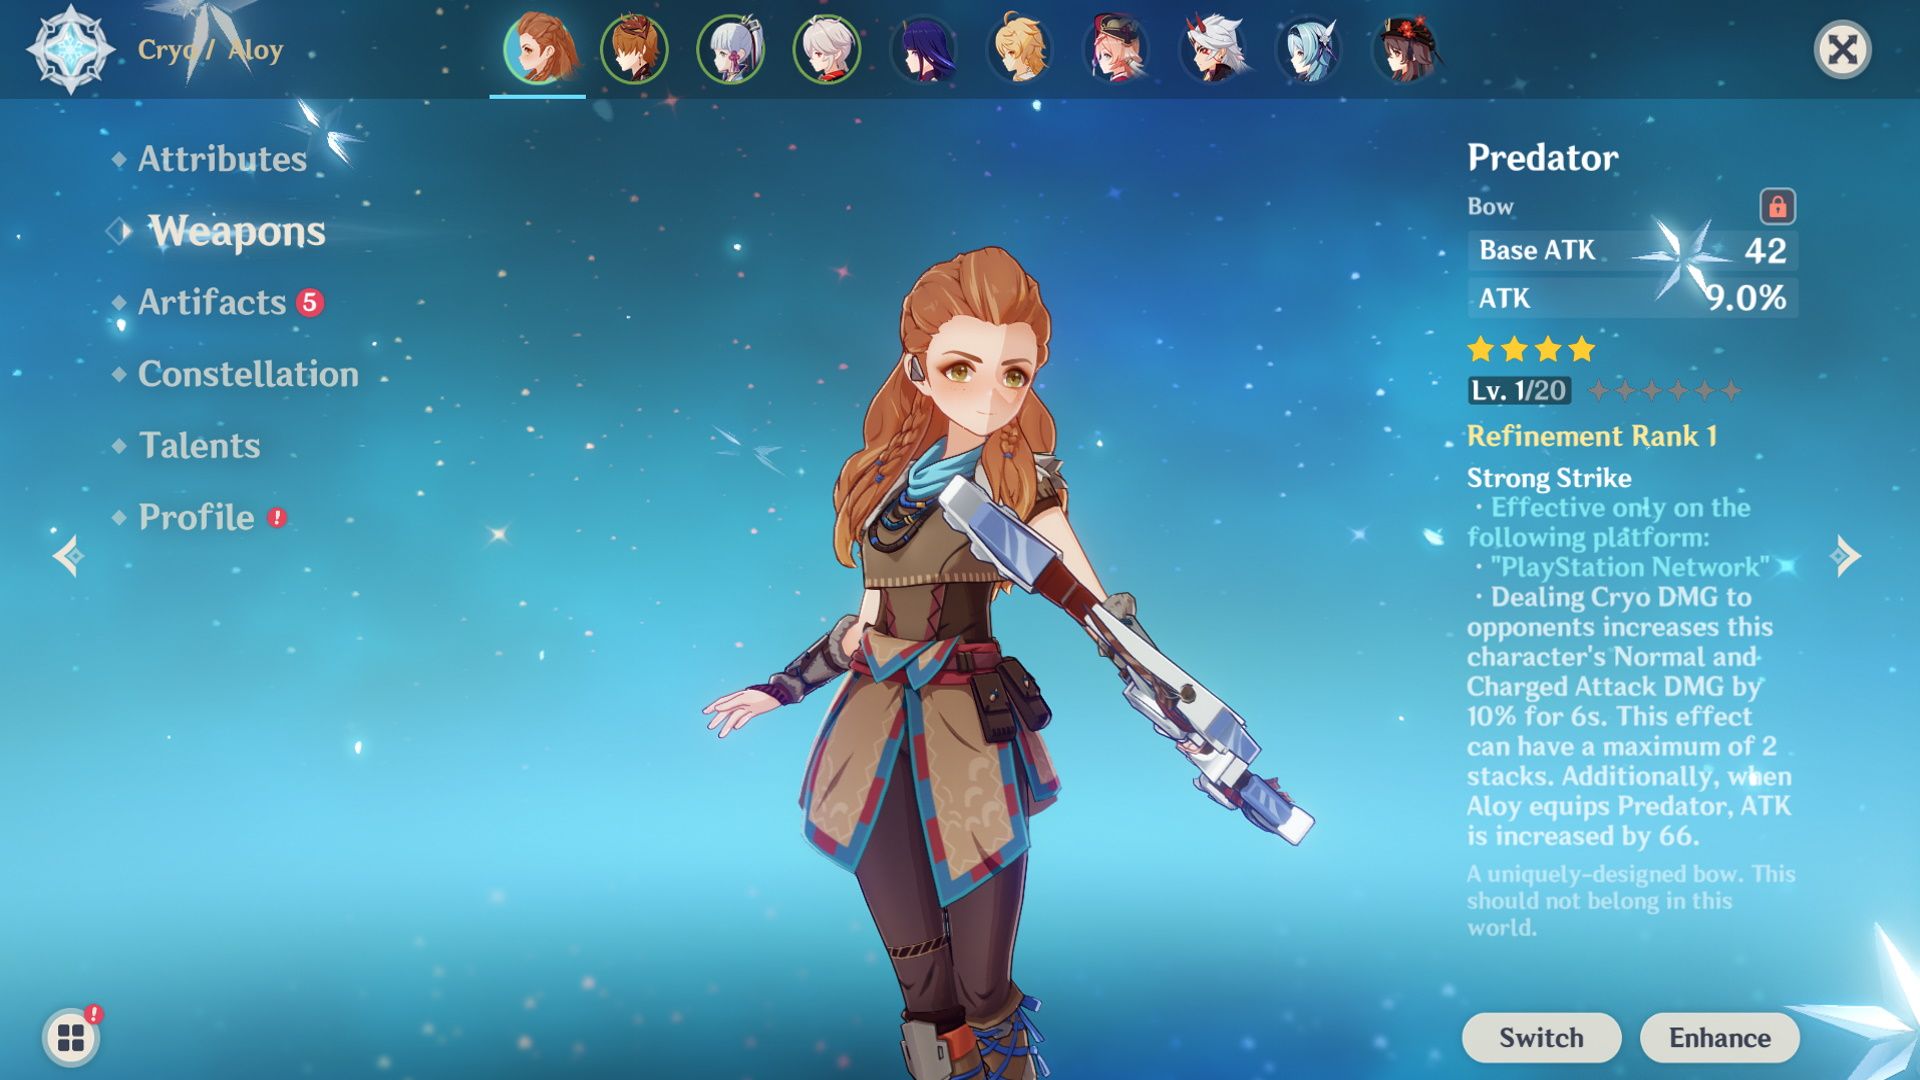 Aloy's weapon screen, showing Aloy holding her signature Predator bow